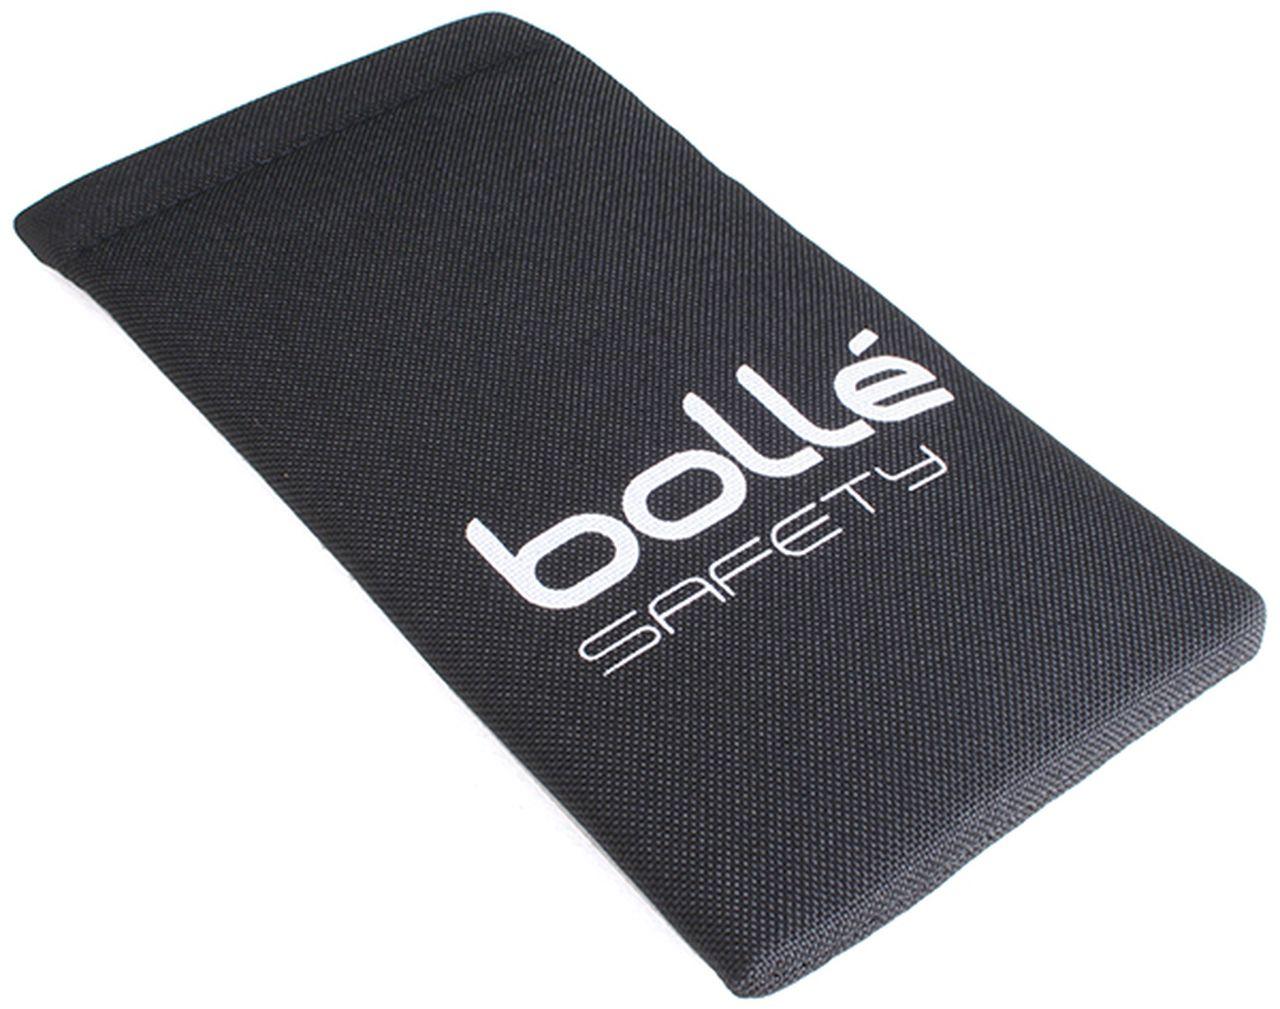 Bolle Logo - Bolle Easy Open Carrying Sunglasses Pouch with Logo